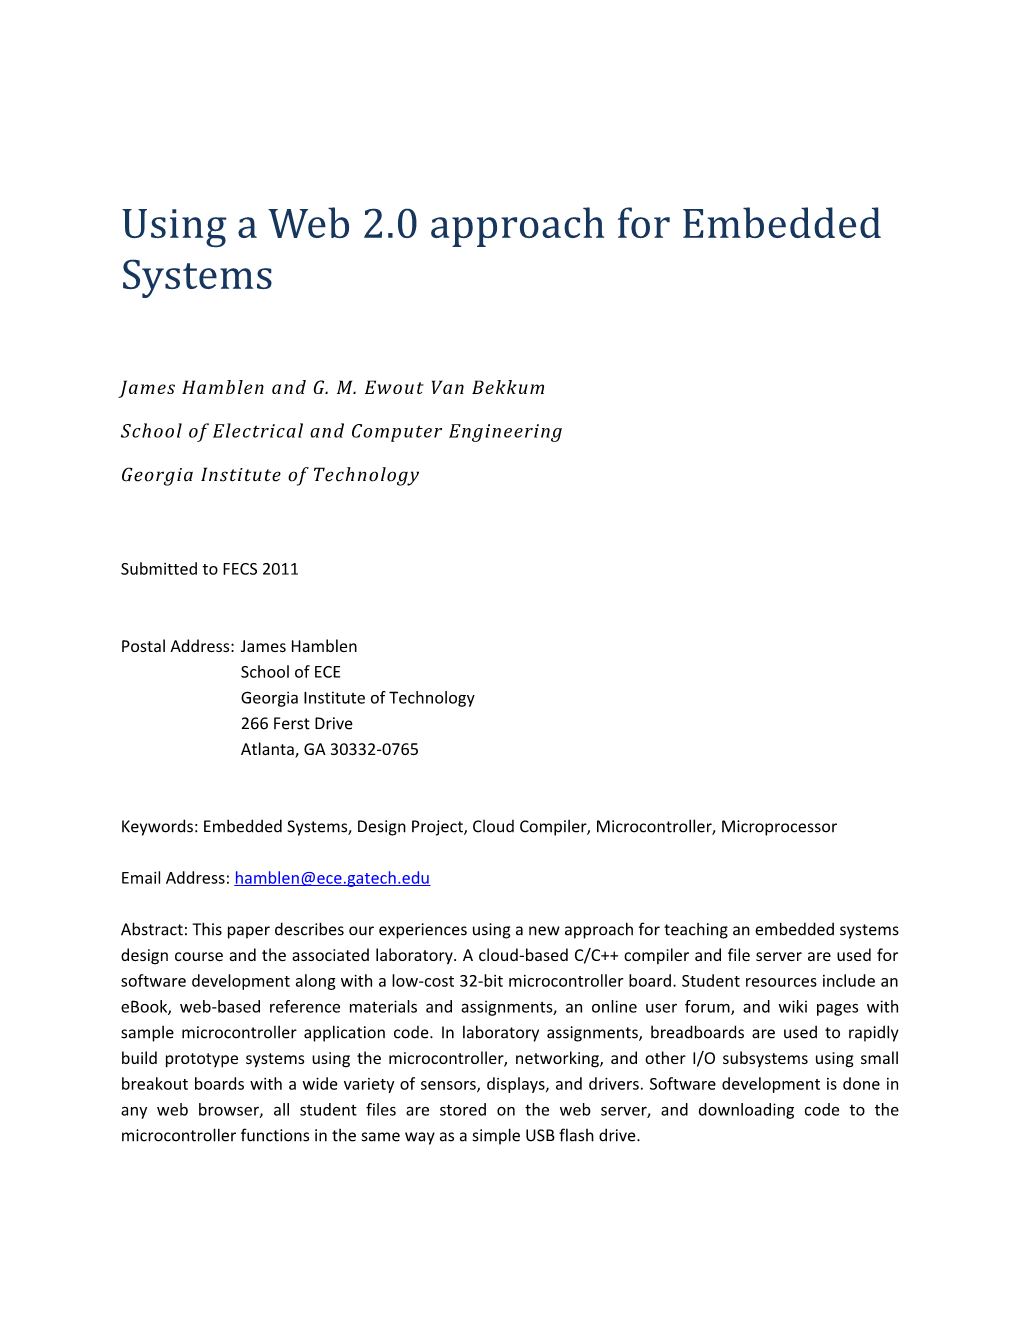 Using a Web 2.0 Approach for Embedded Systems